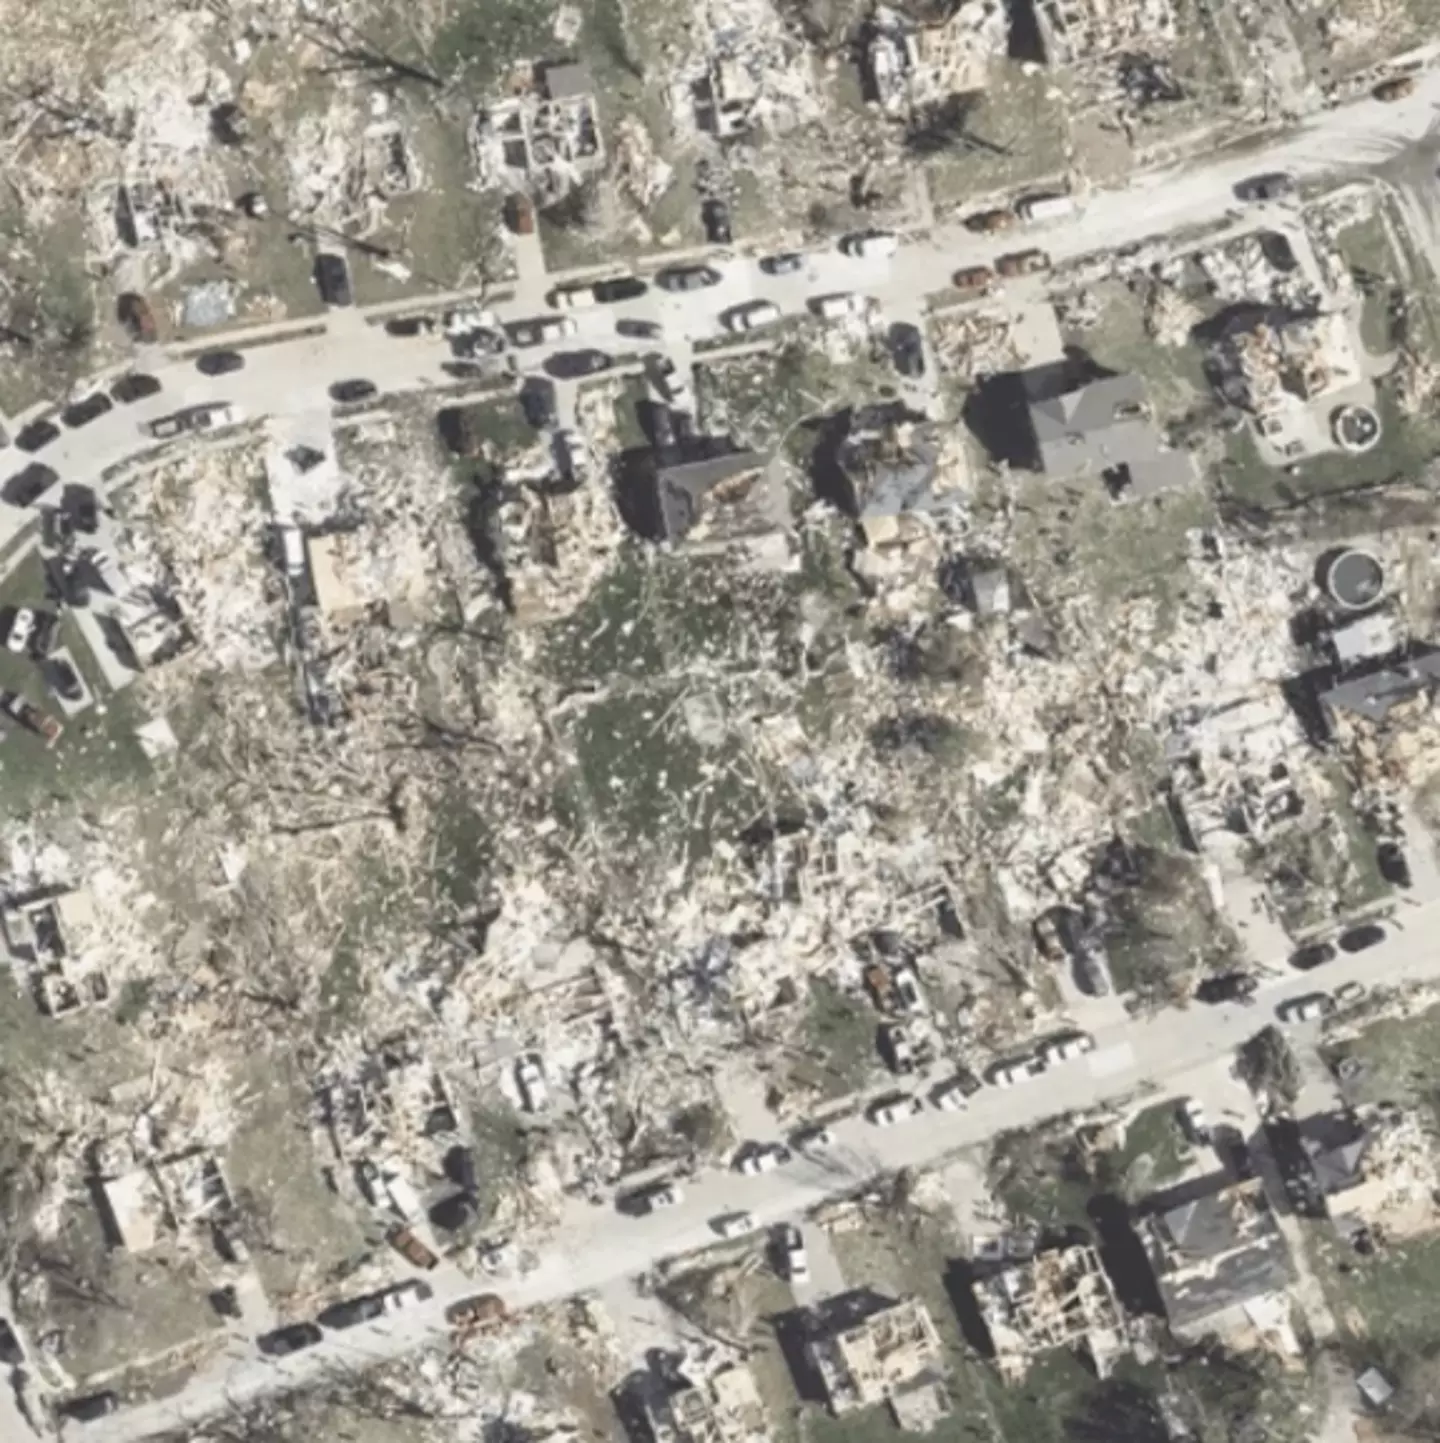 Aerial images taken before  and after tornado reveal heartbreaking extent of neighbourhood damage